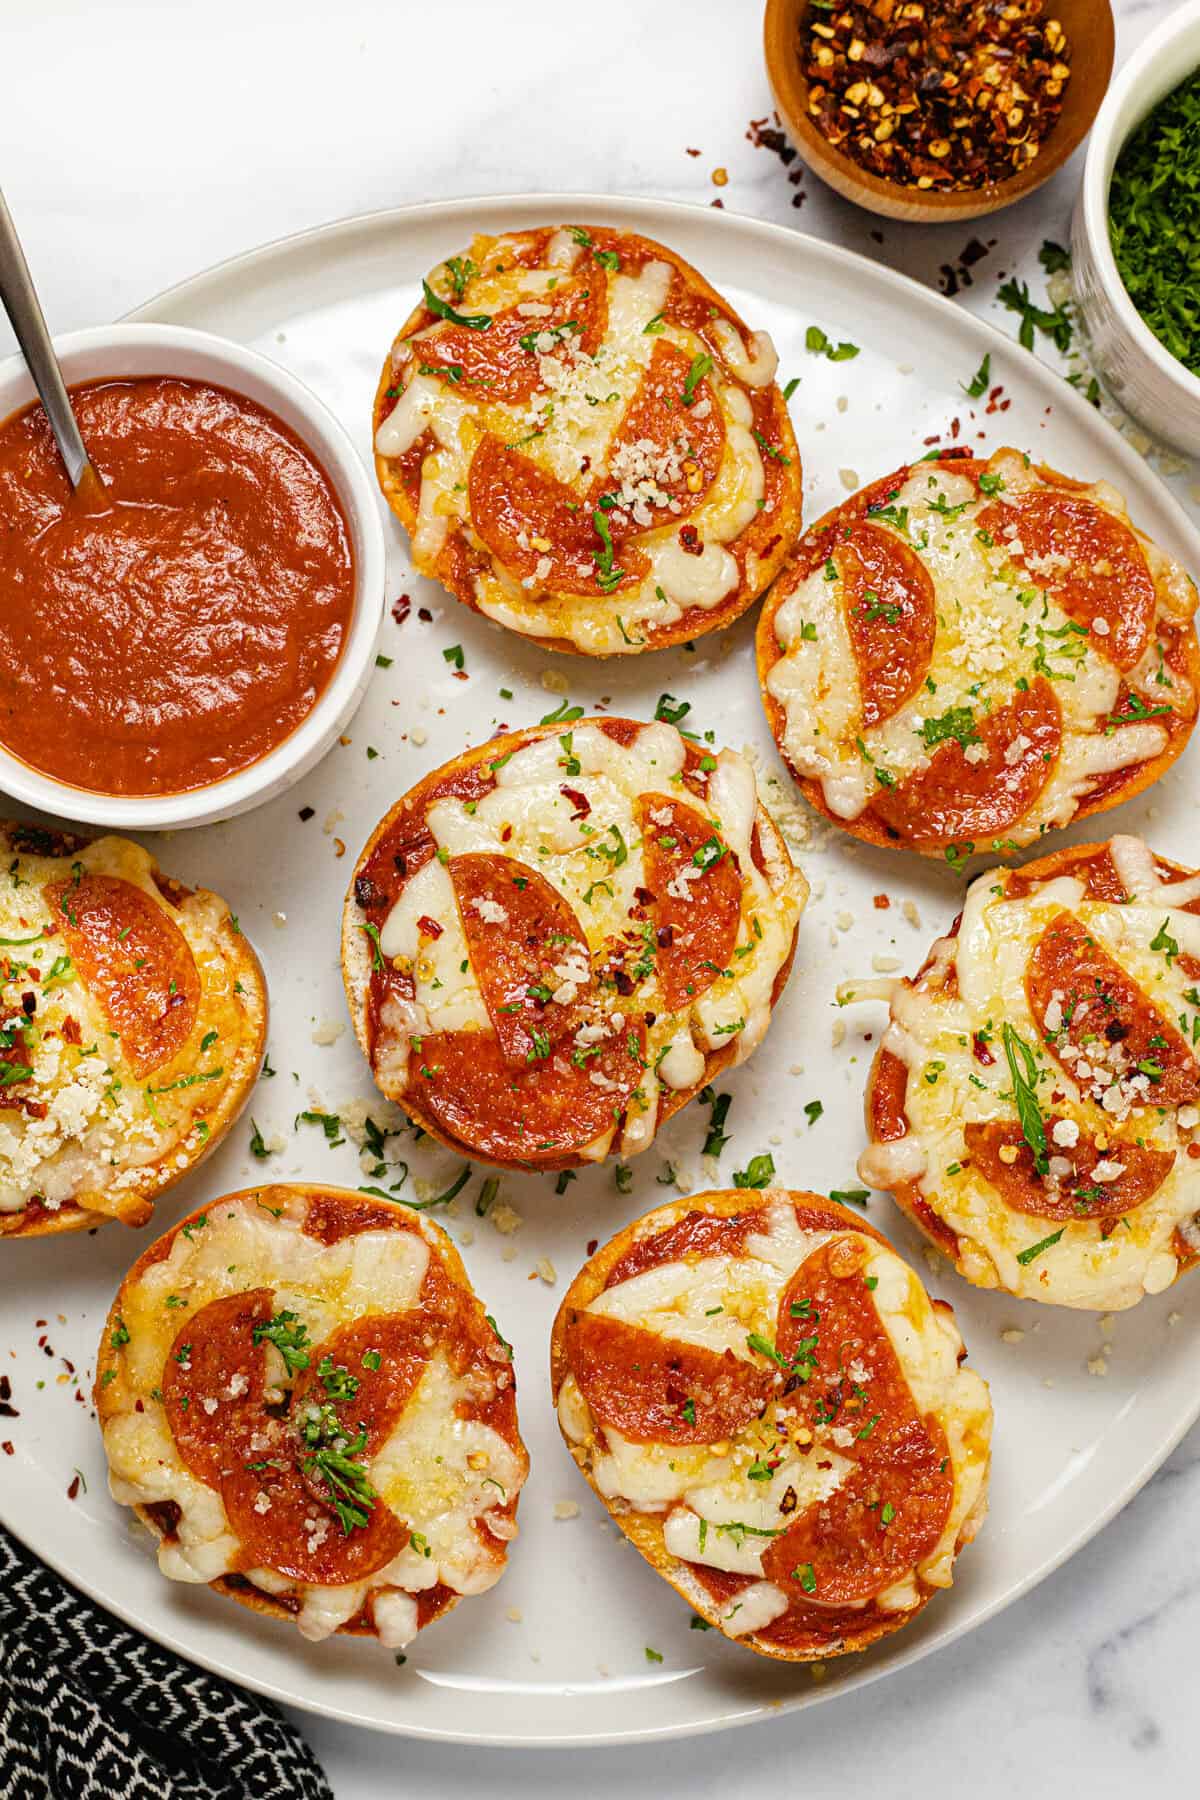 White plate filled with homemade pizza bagel bites garnished with parsley